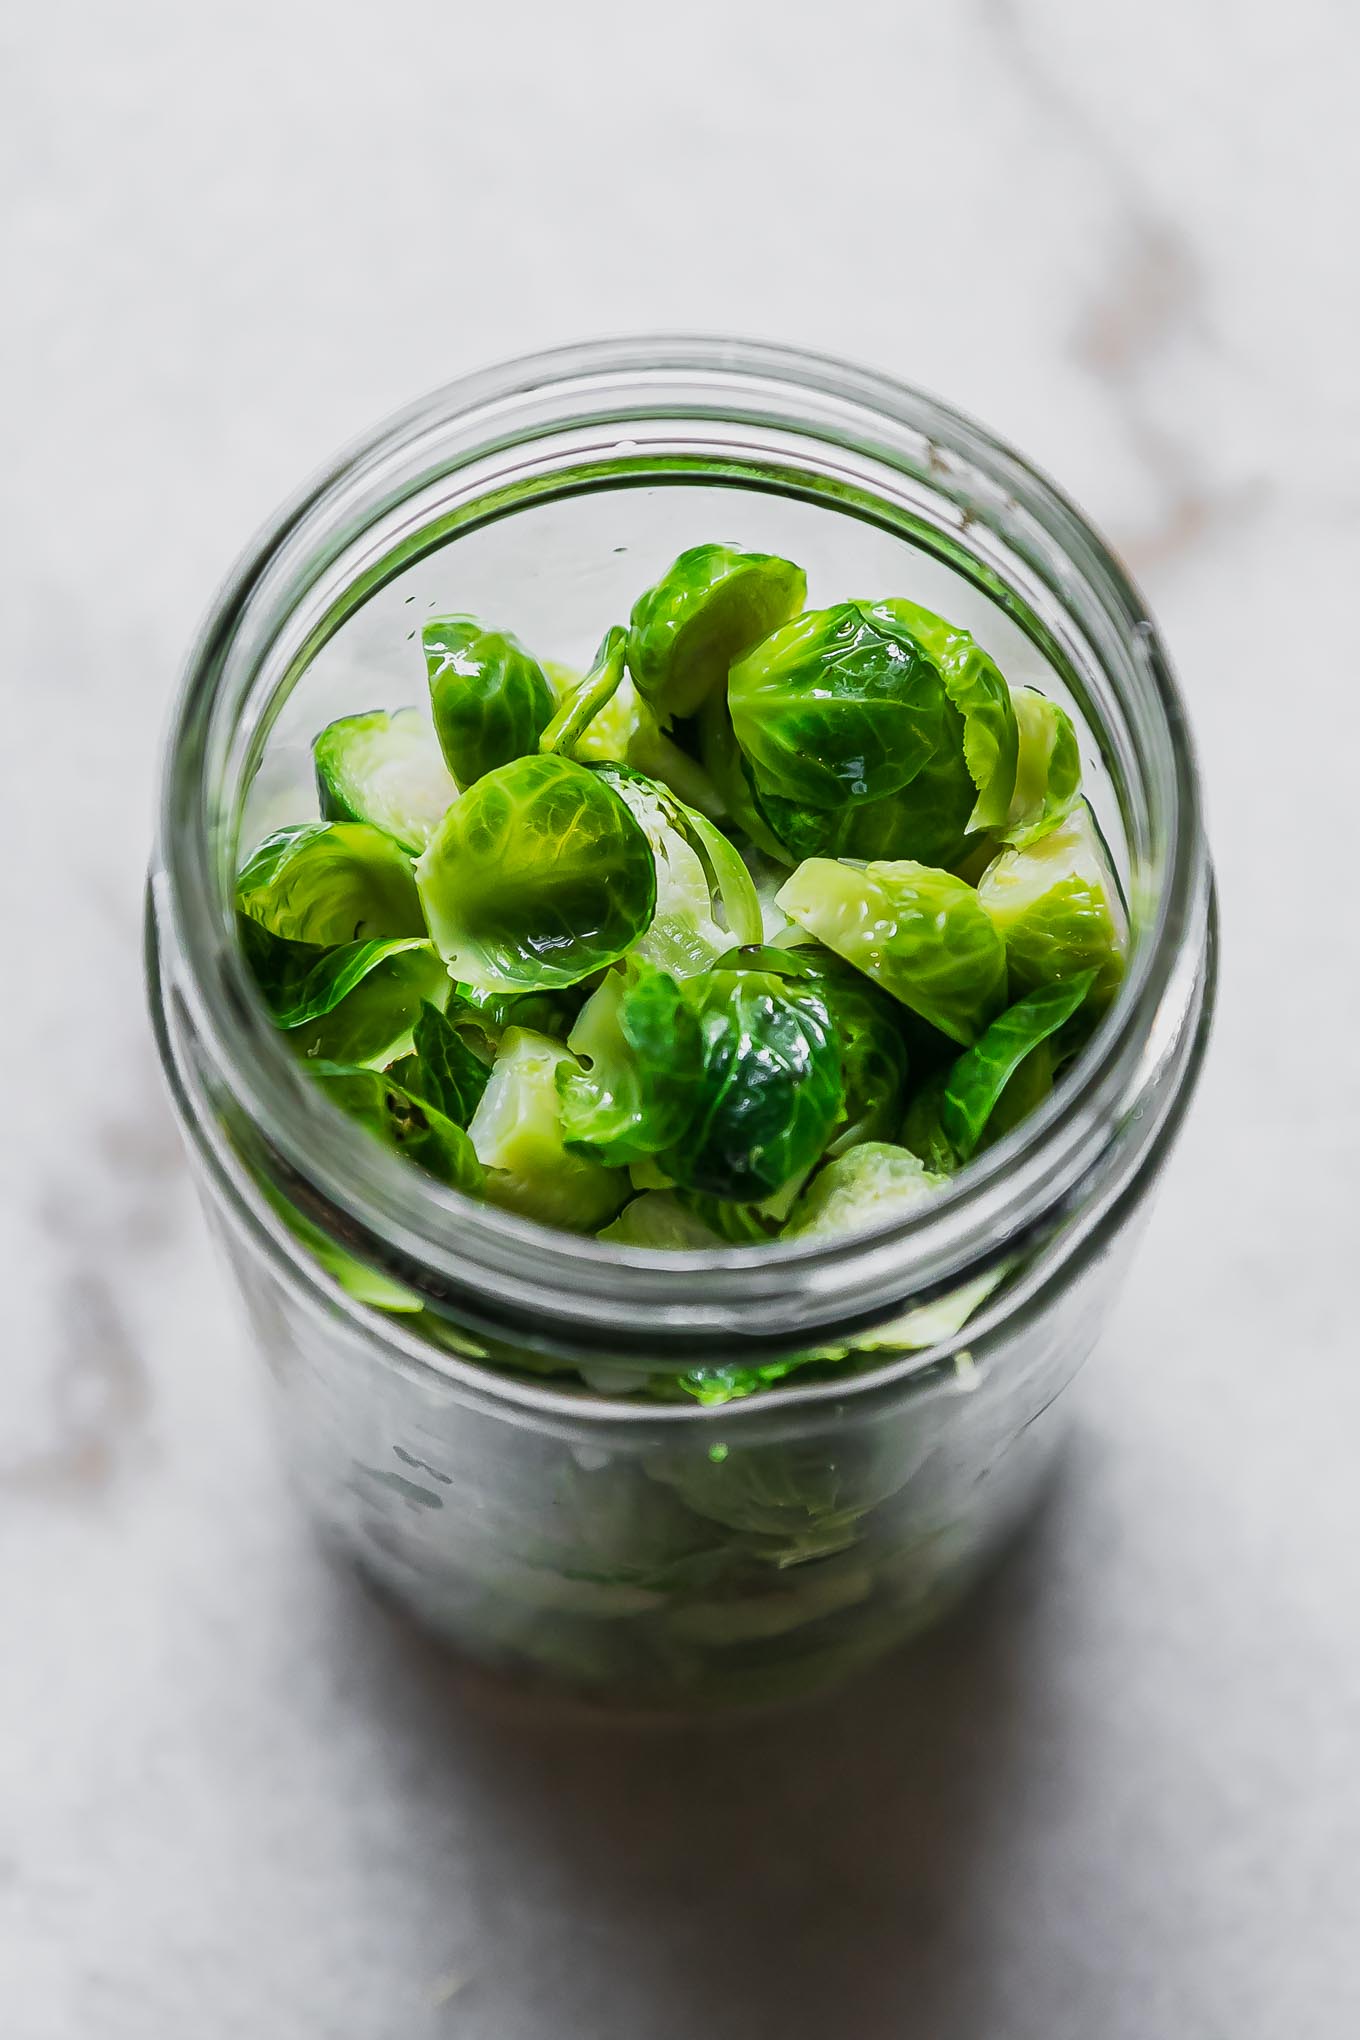 brussels sprouts inside a jar before pickling